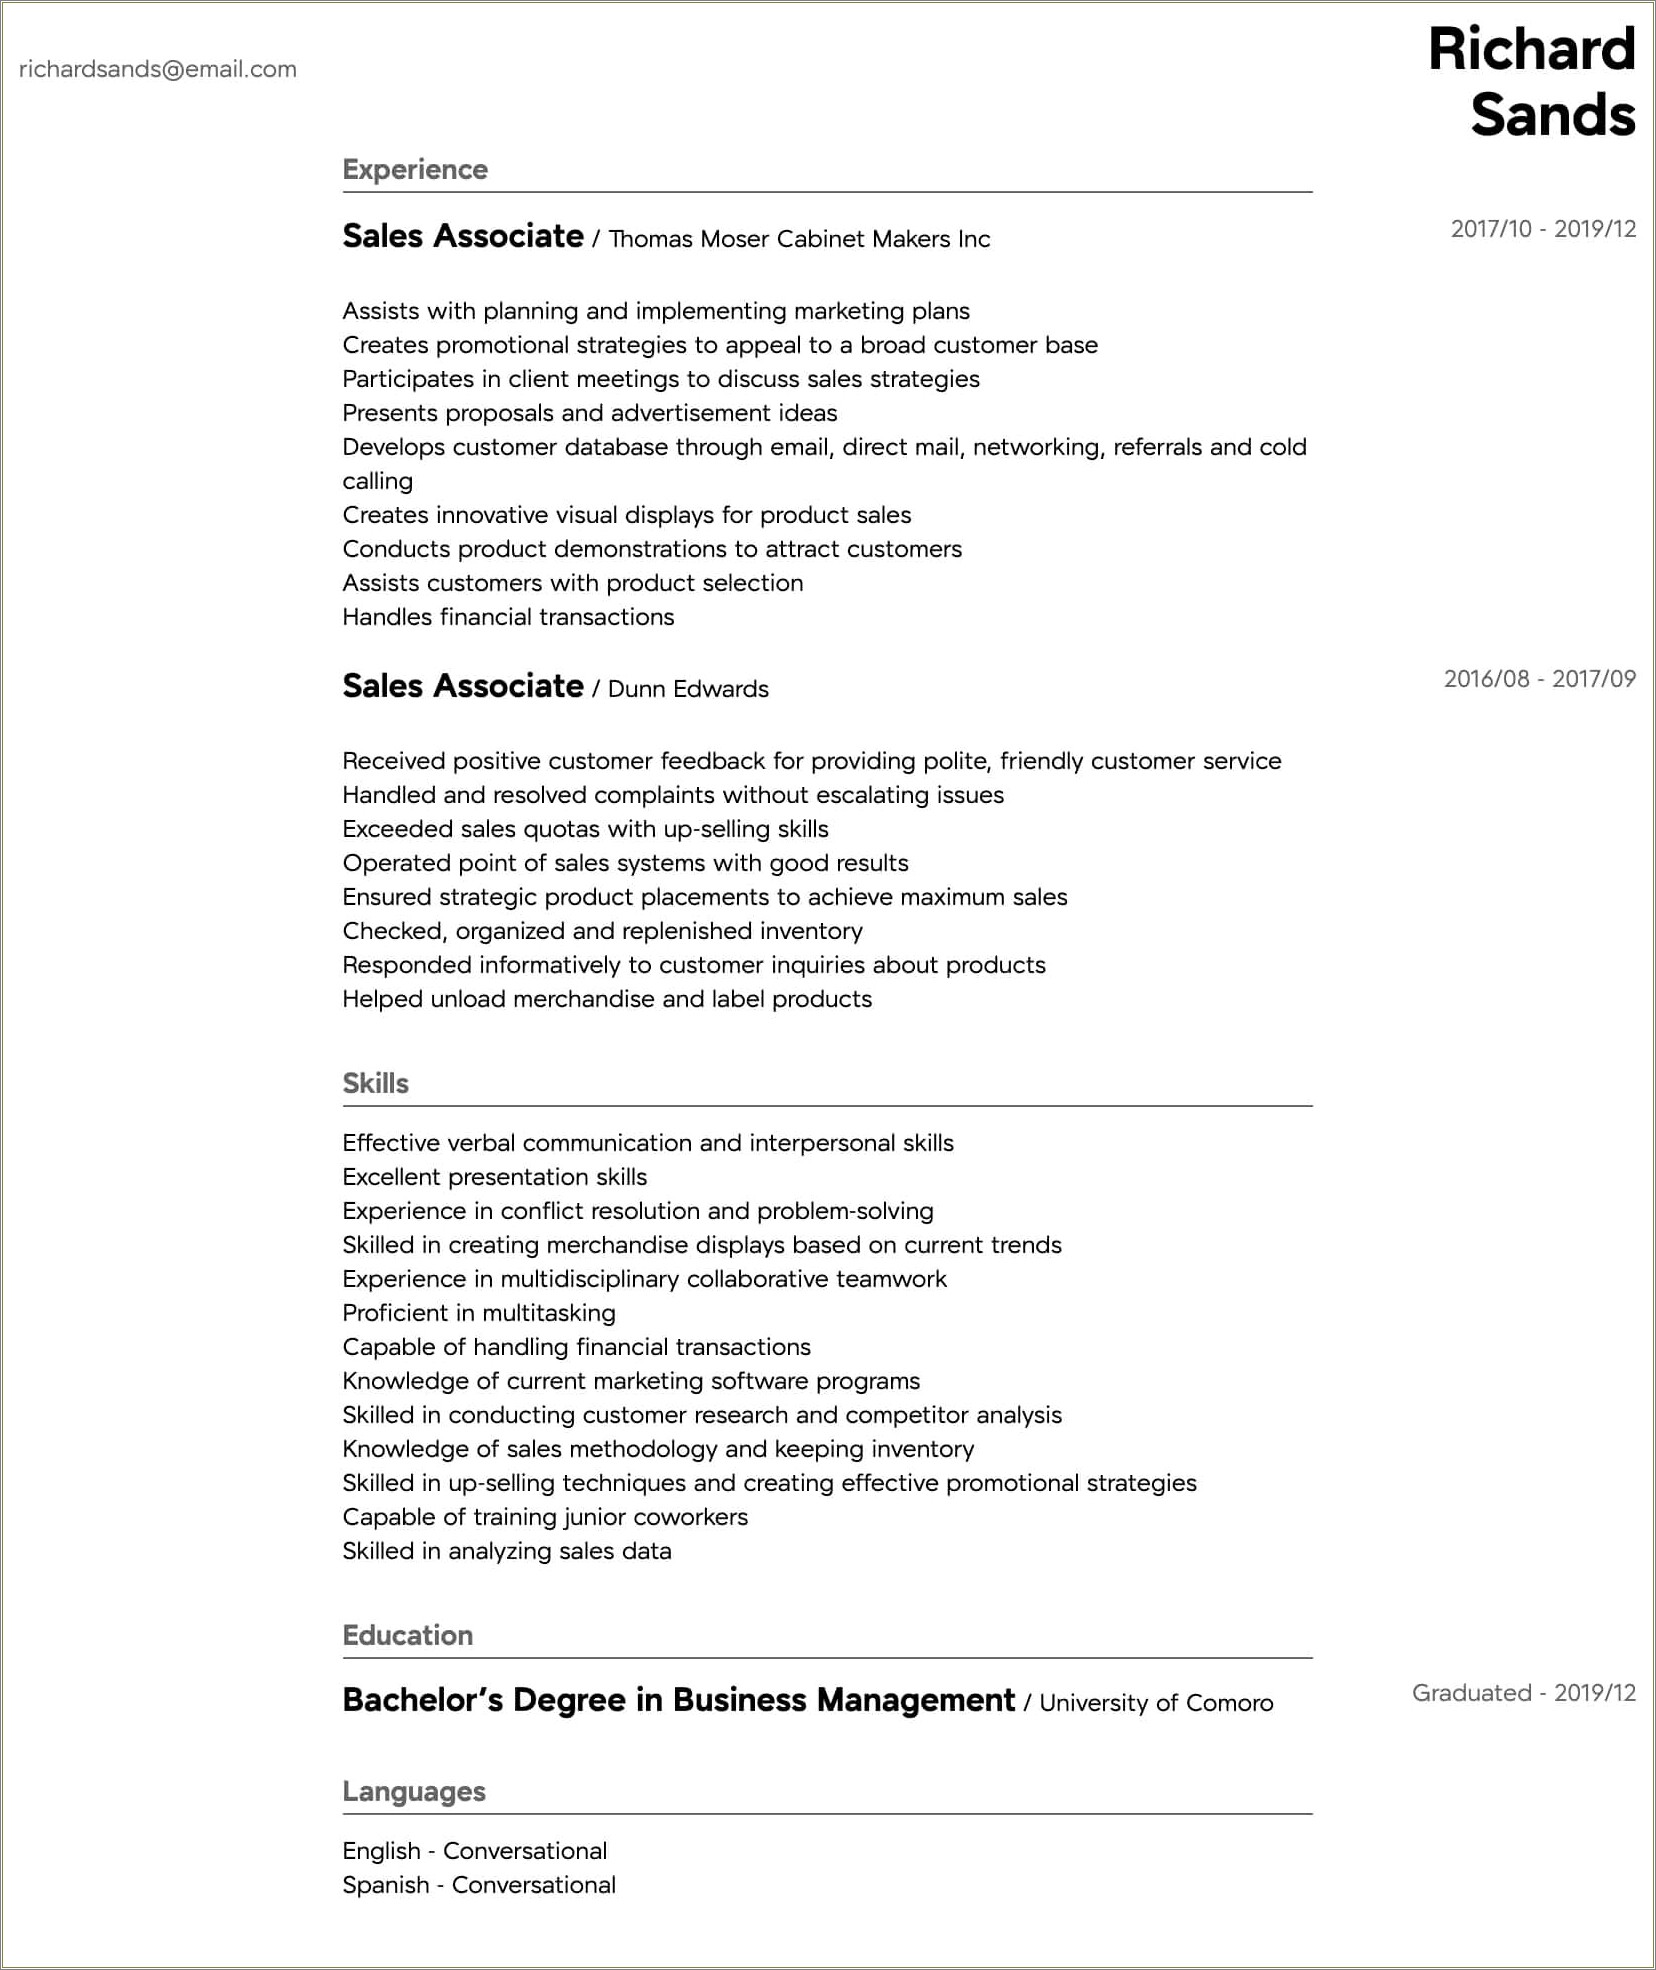 Sample Resume With Associates Degree Listed